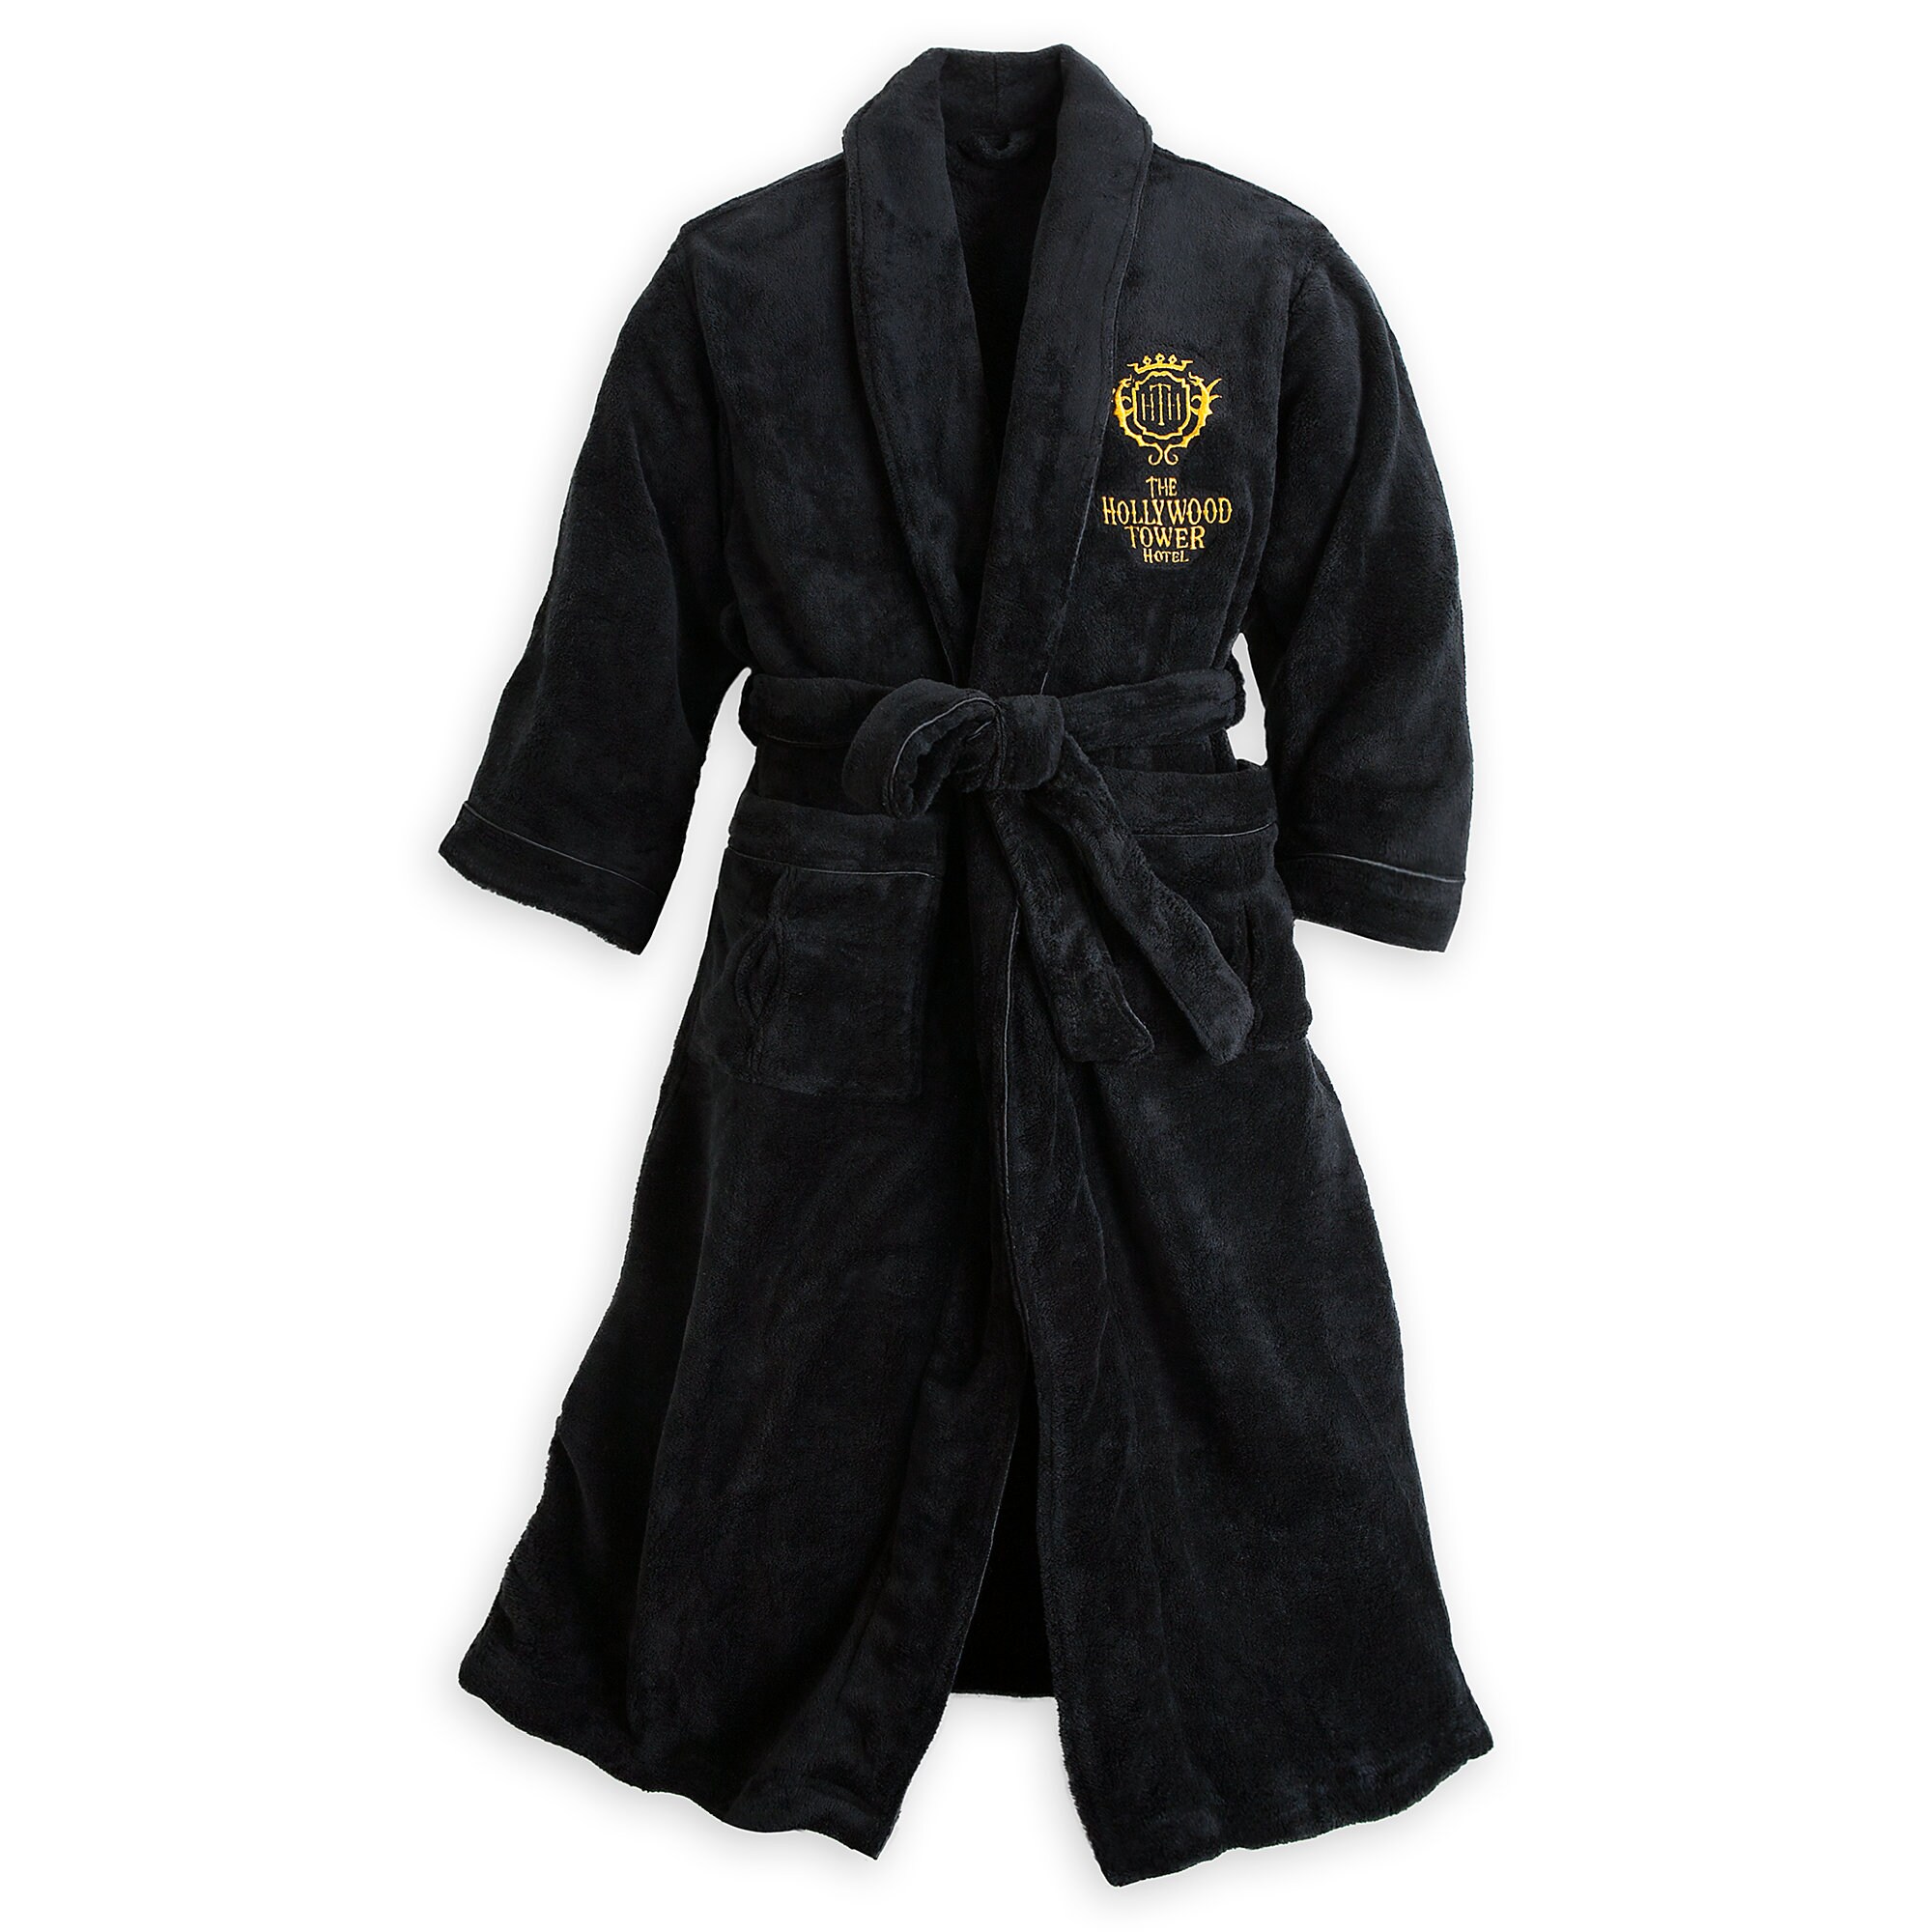 Hollywood Tower Hotel Plush Robe for Men